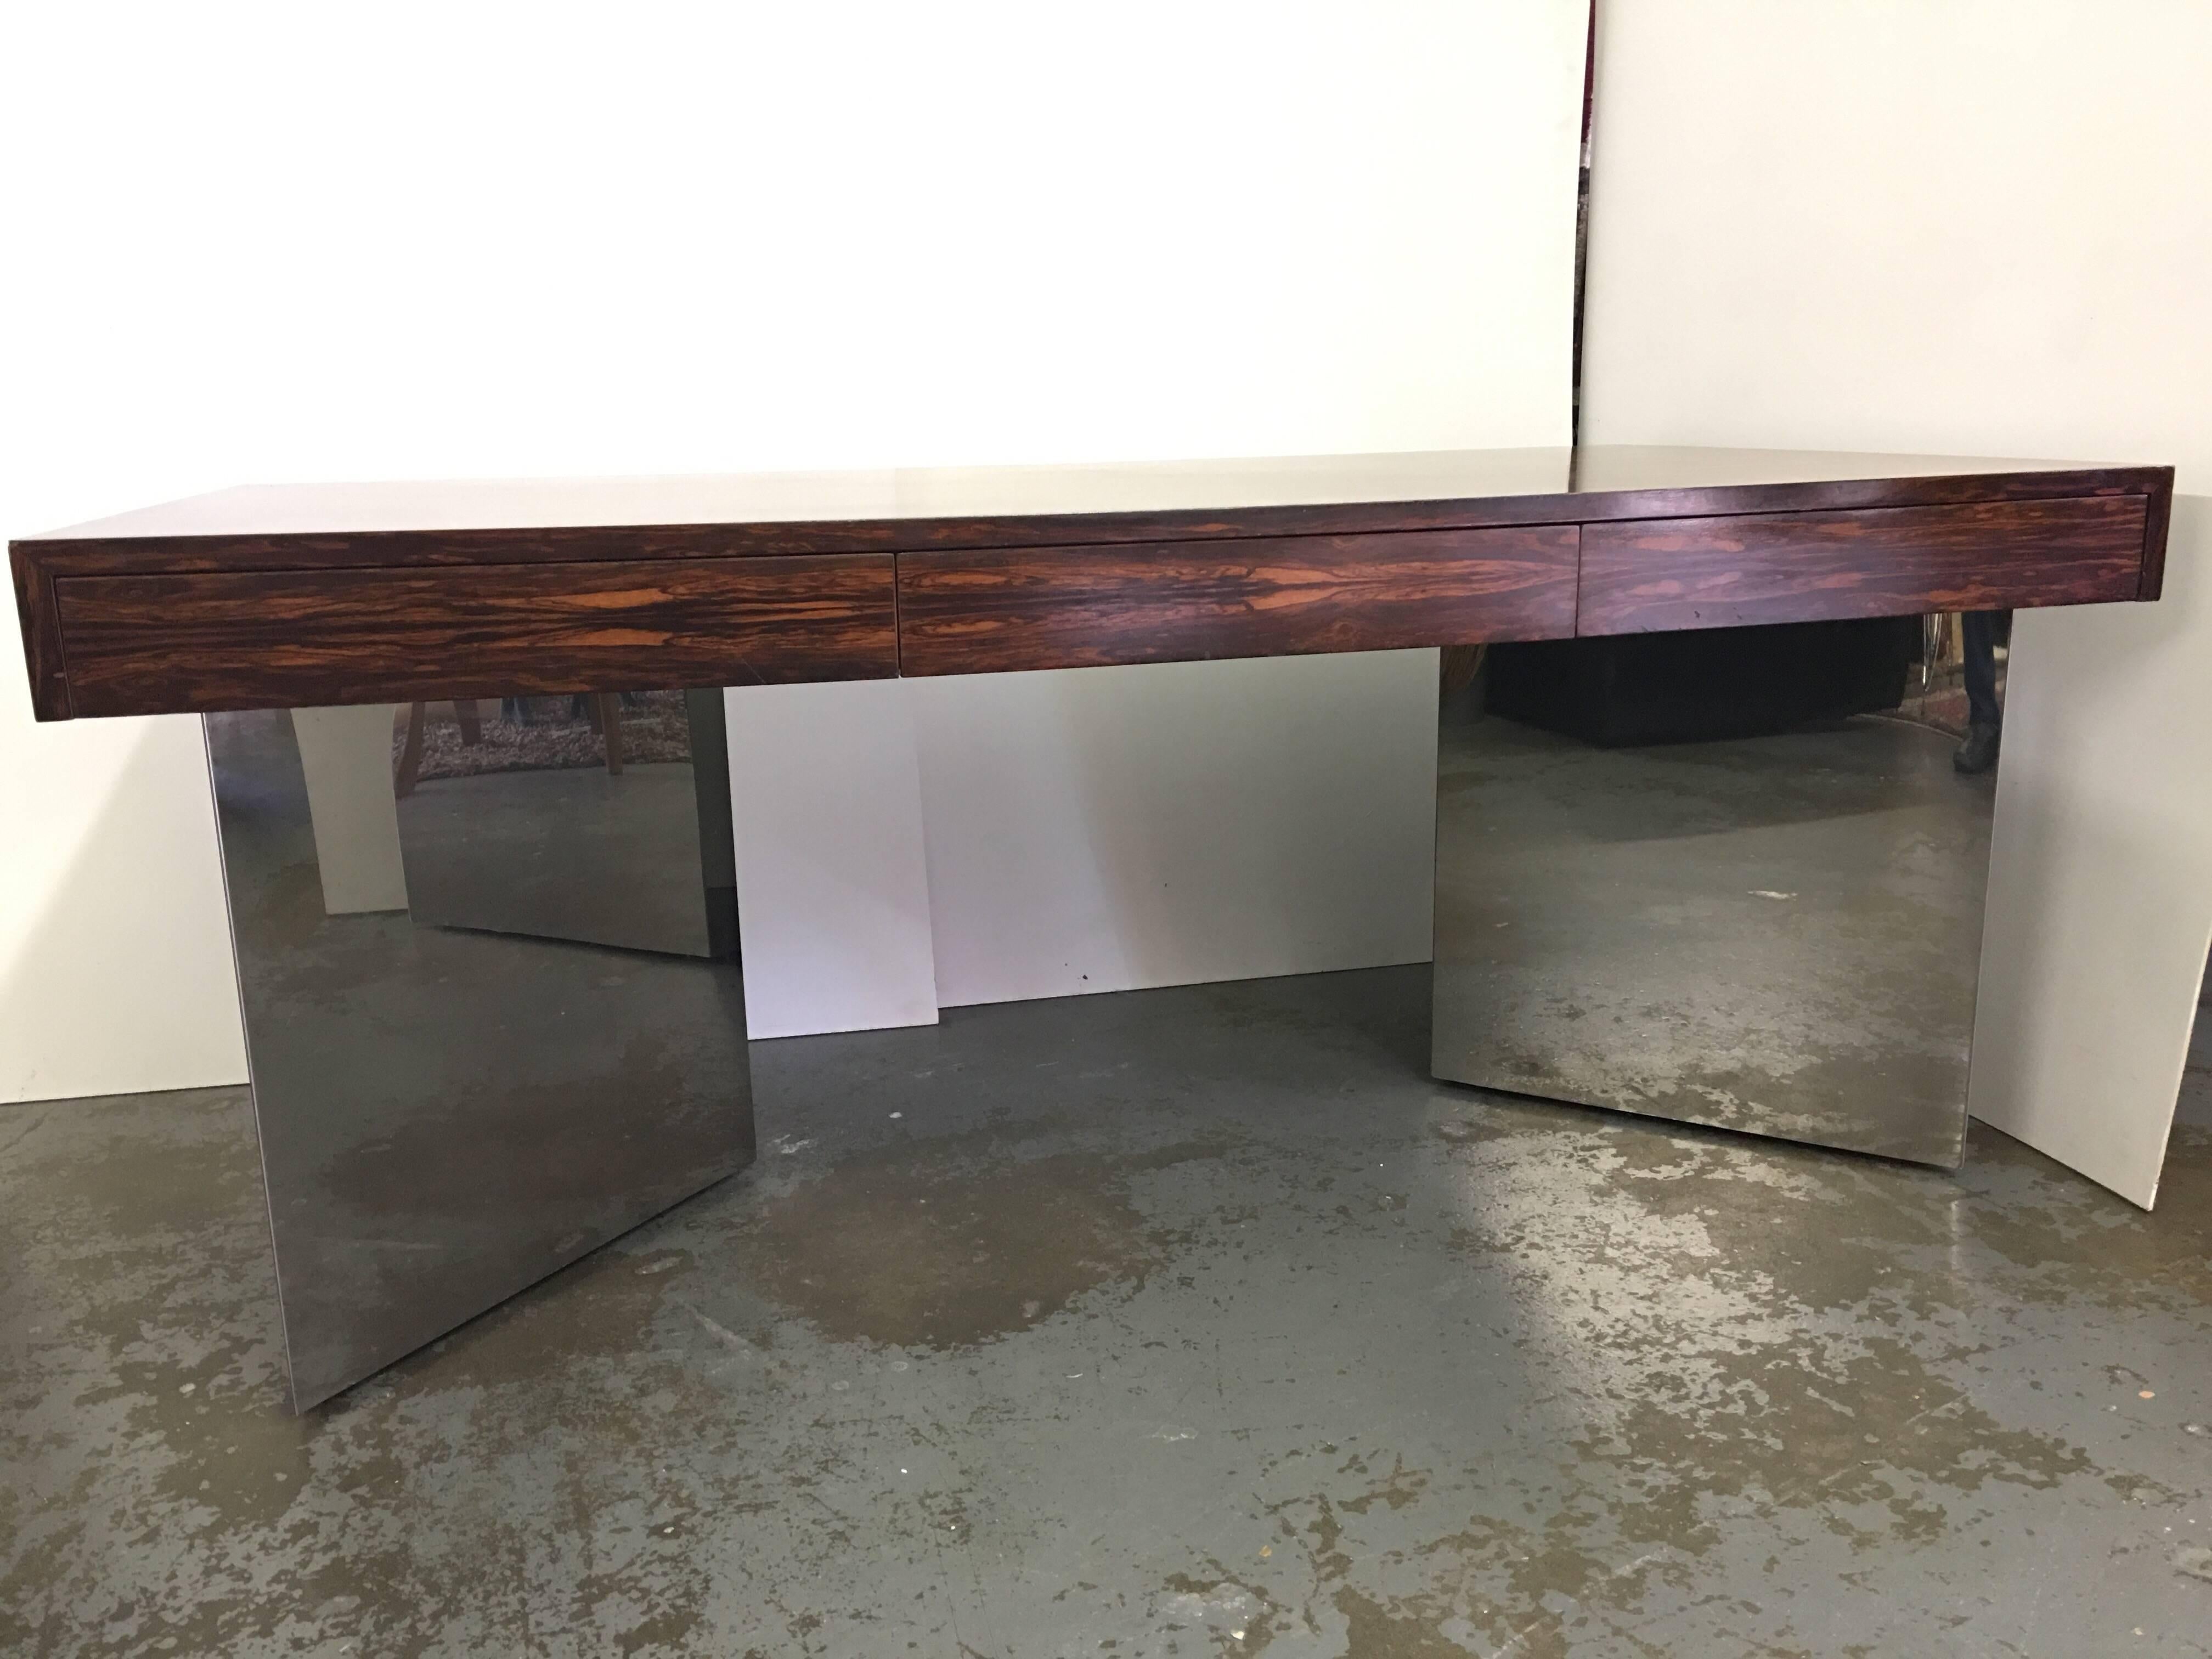 This is an absolute stunner in person. This rosewood desk is attributed to the Pace Collection. The Desk has gorgeous figurale Brazilian Rosewood grain. There are three deep drawers to front. It rests on mirror chrome metal triangular plinths or